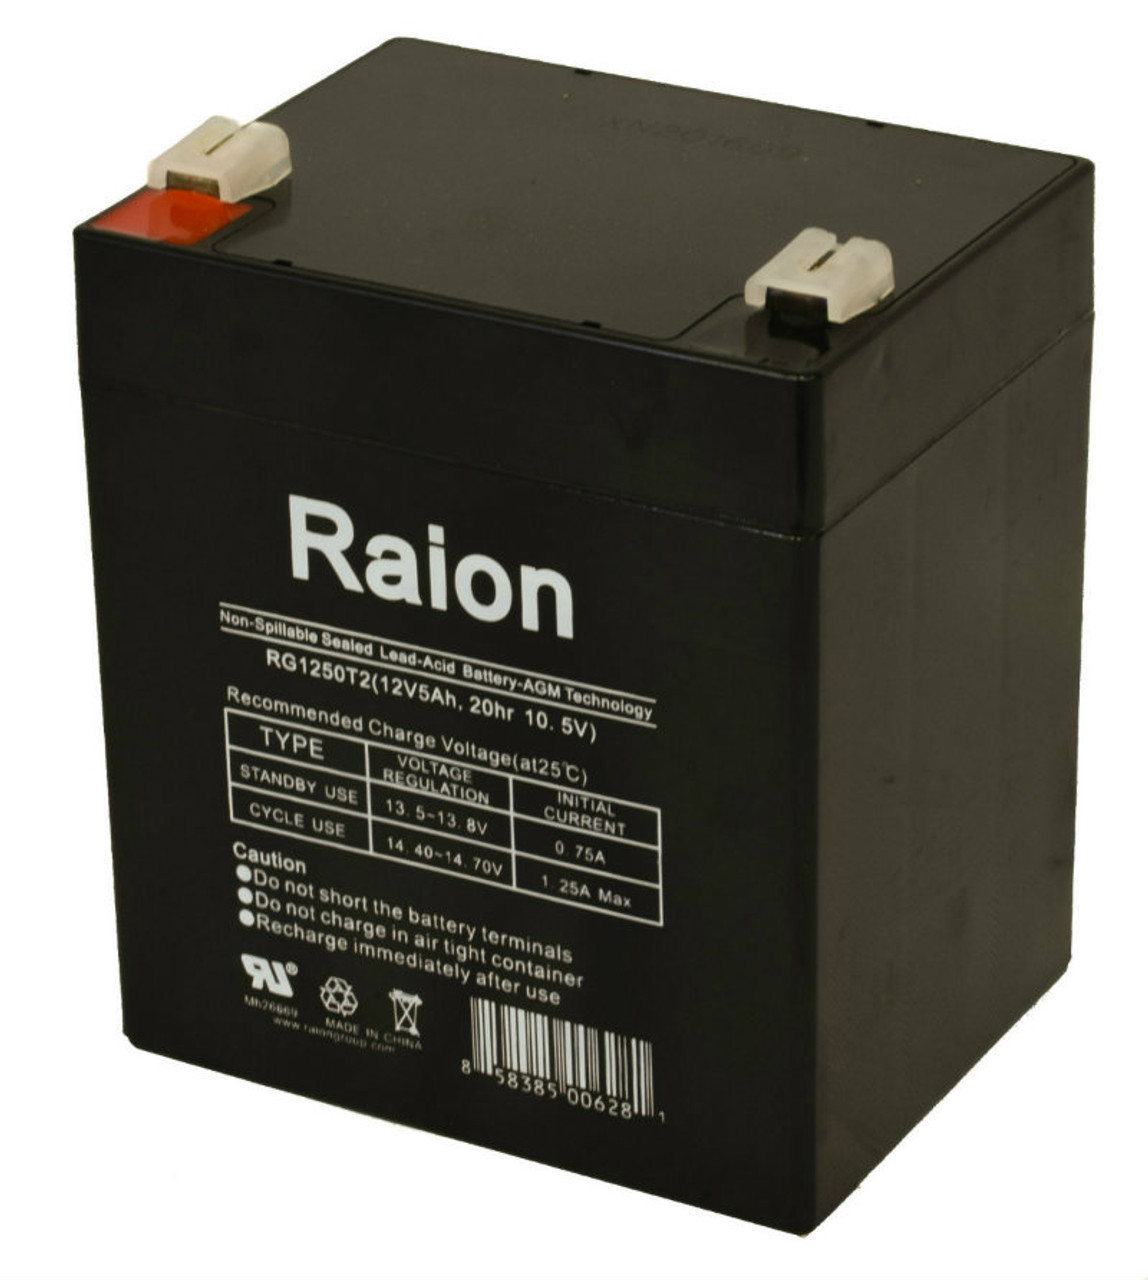 Raion Power RG1250T1 Replacement Battery for Weida HX12-5 F1